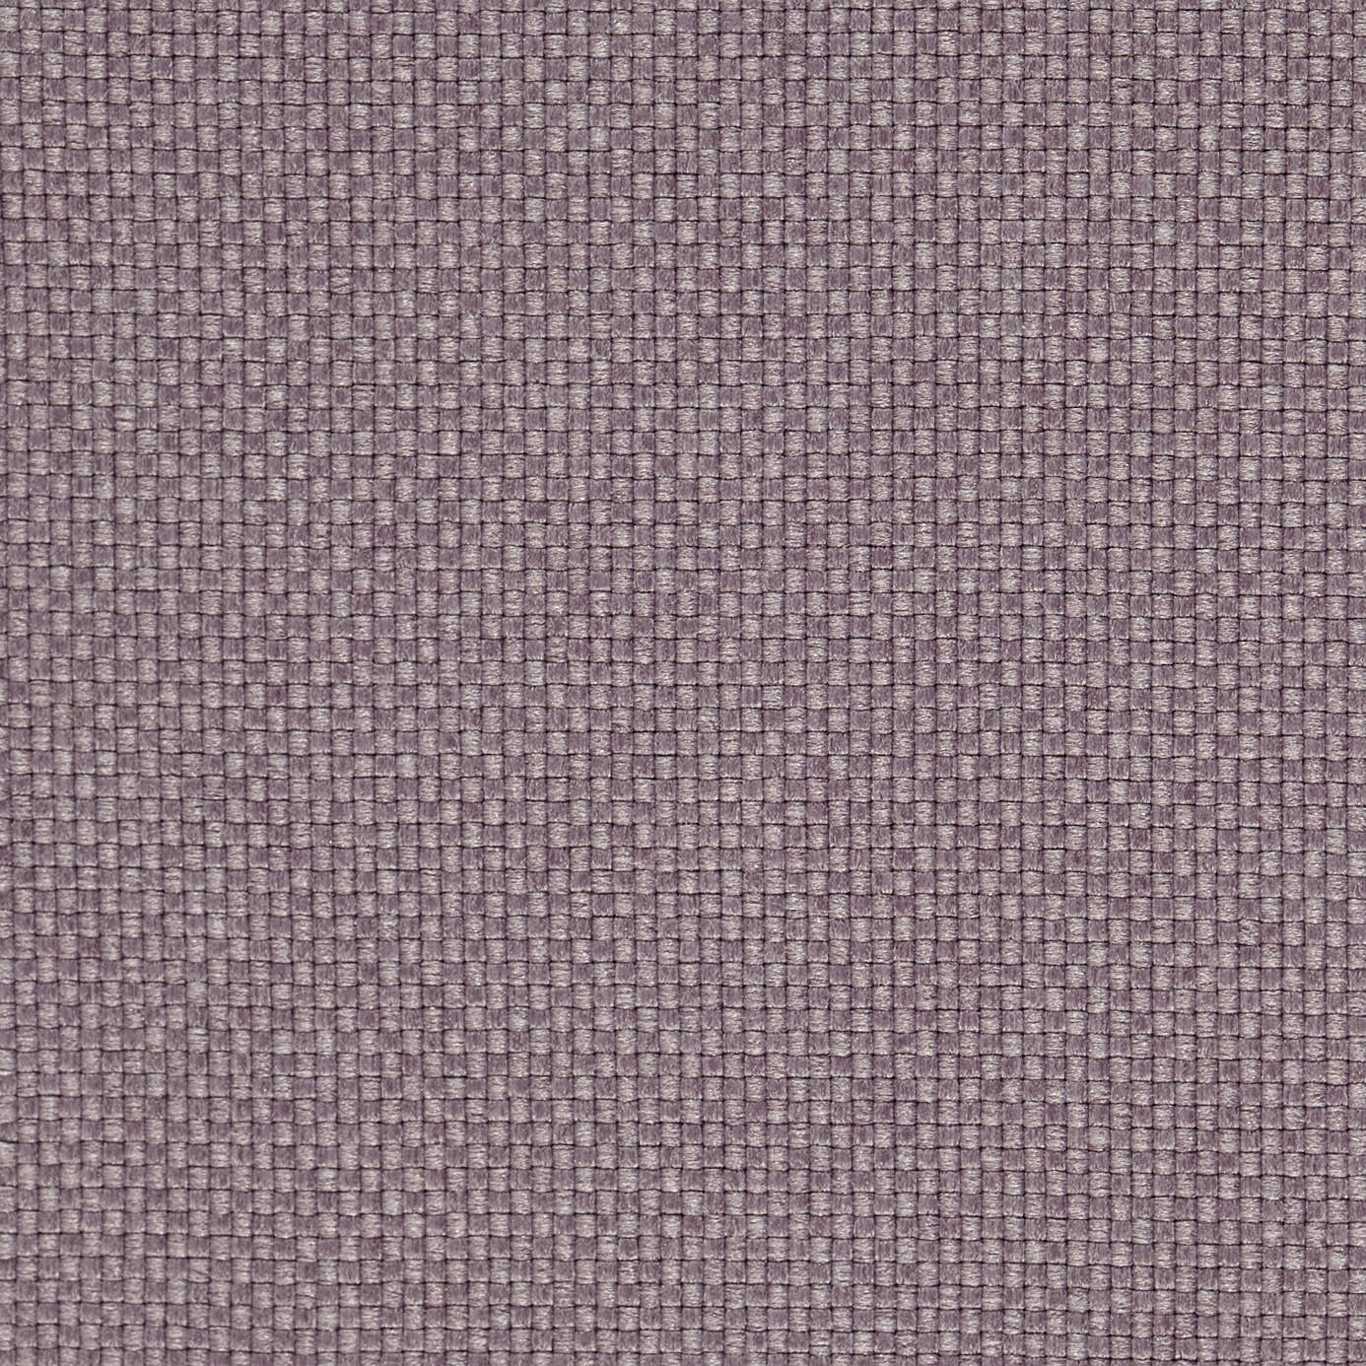 Lepton Lavender Fabric by HAR